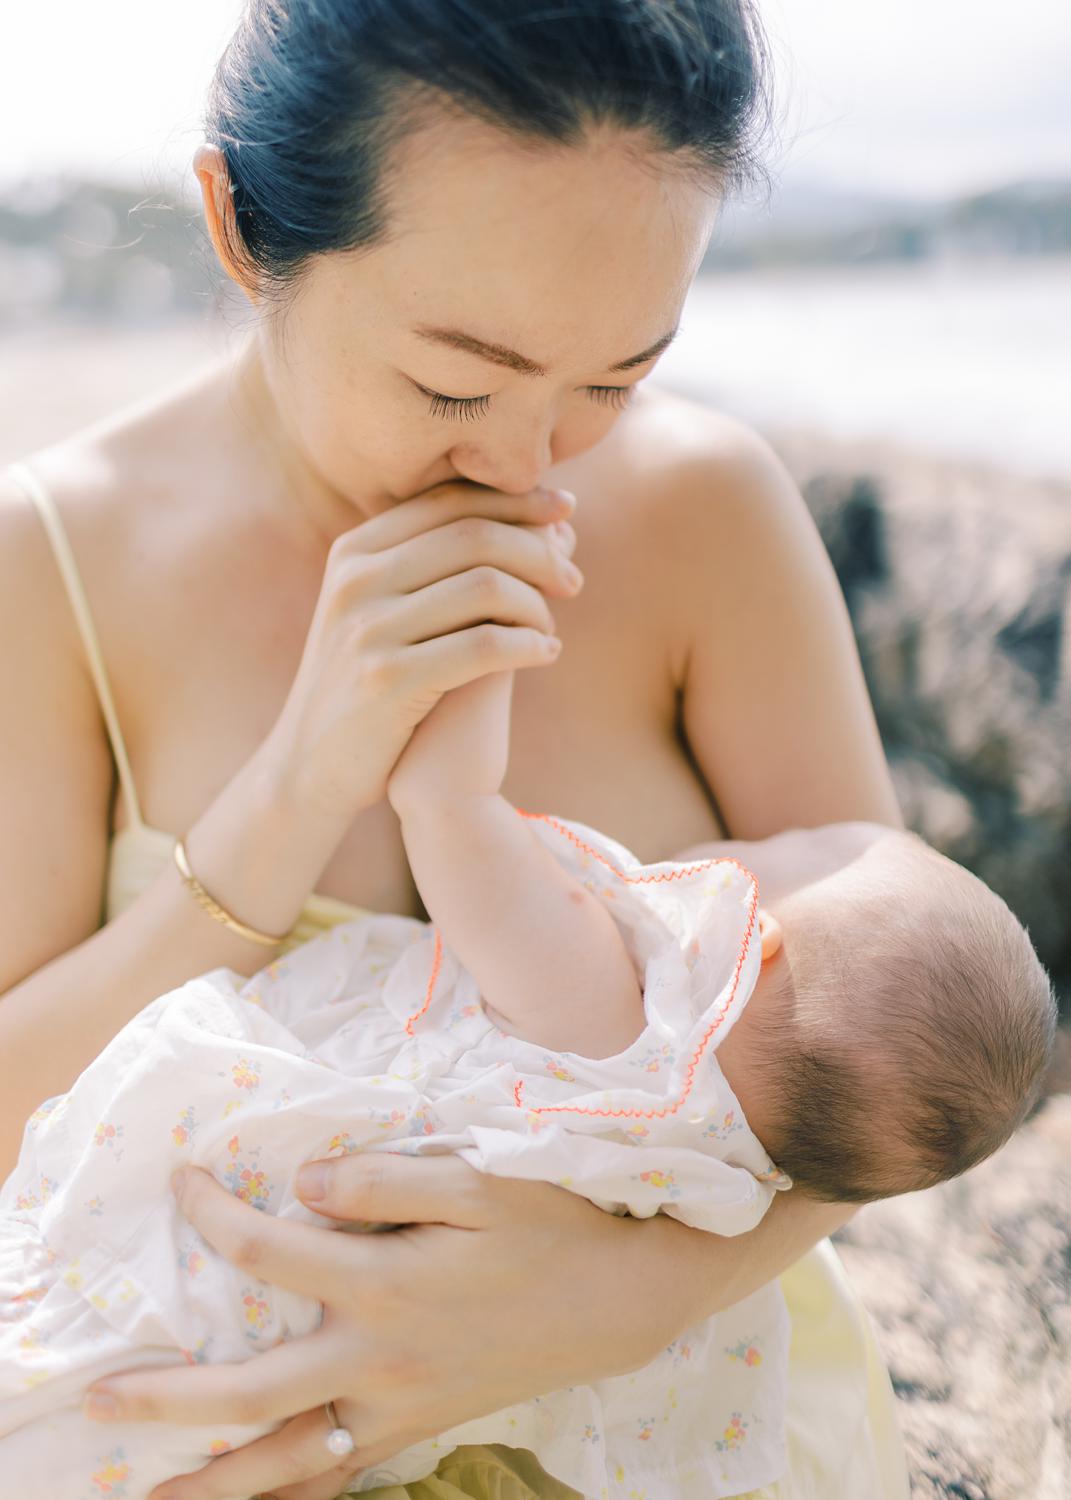 mother is kissing baby's hand while she breastfeeds her baby girl